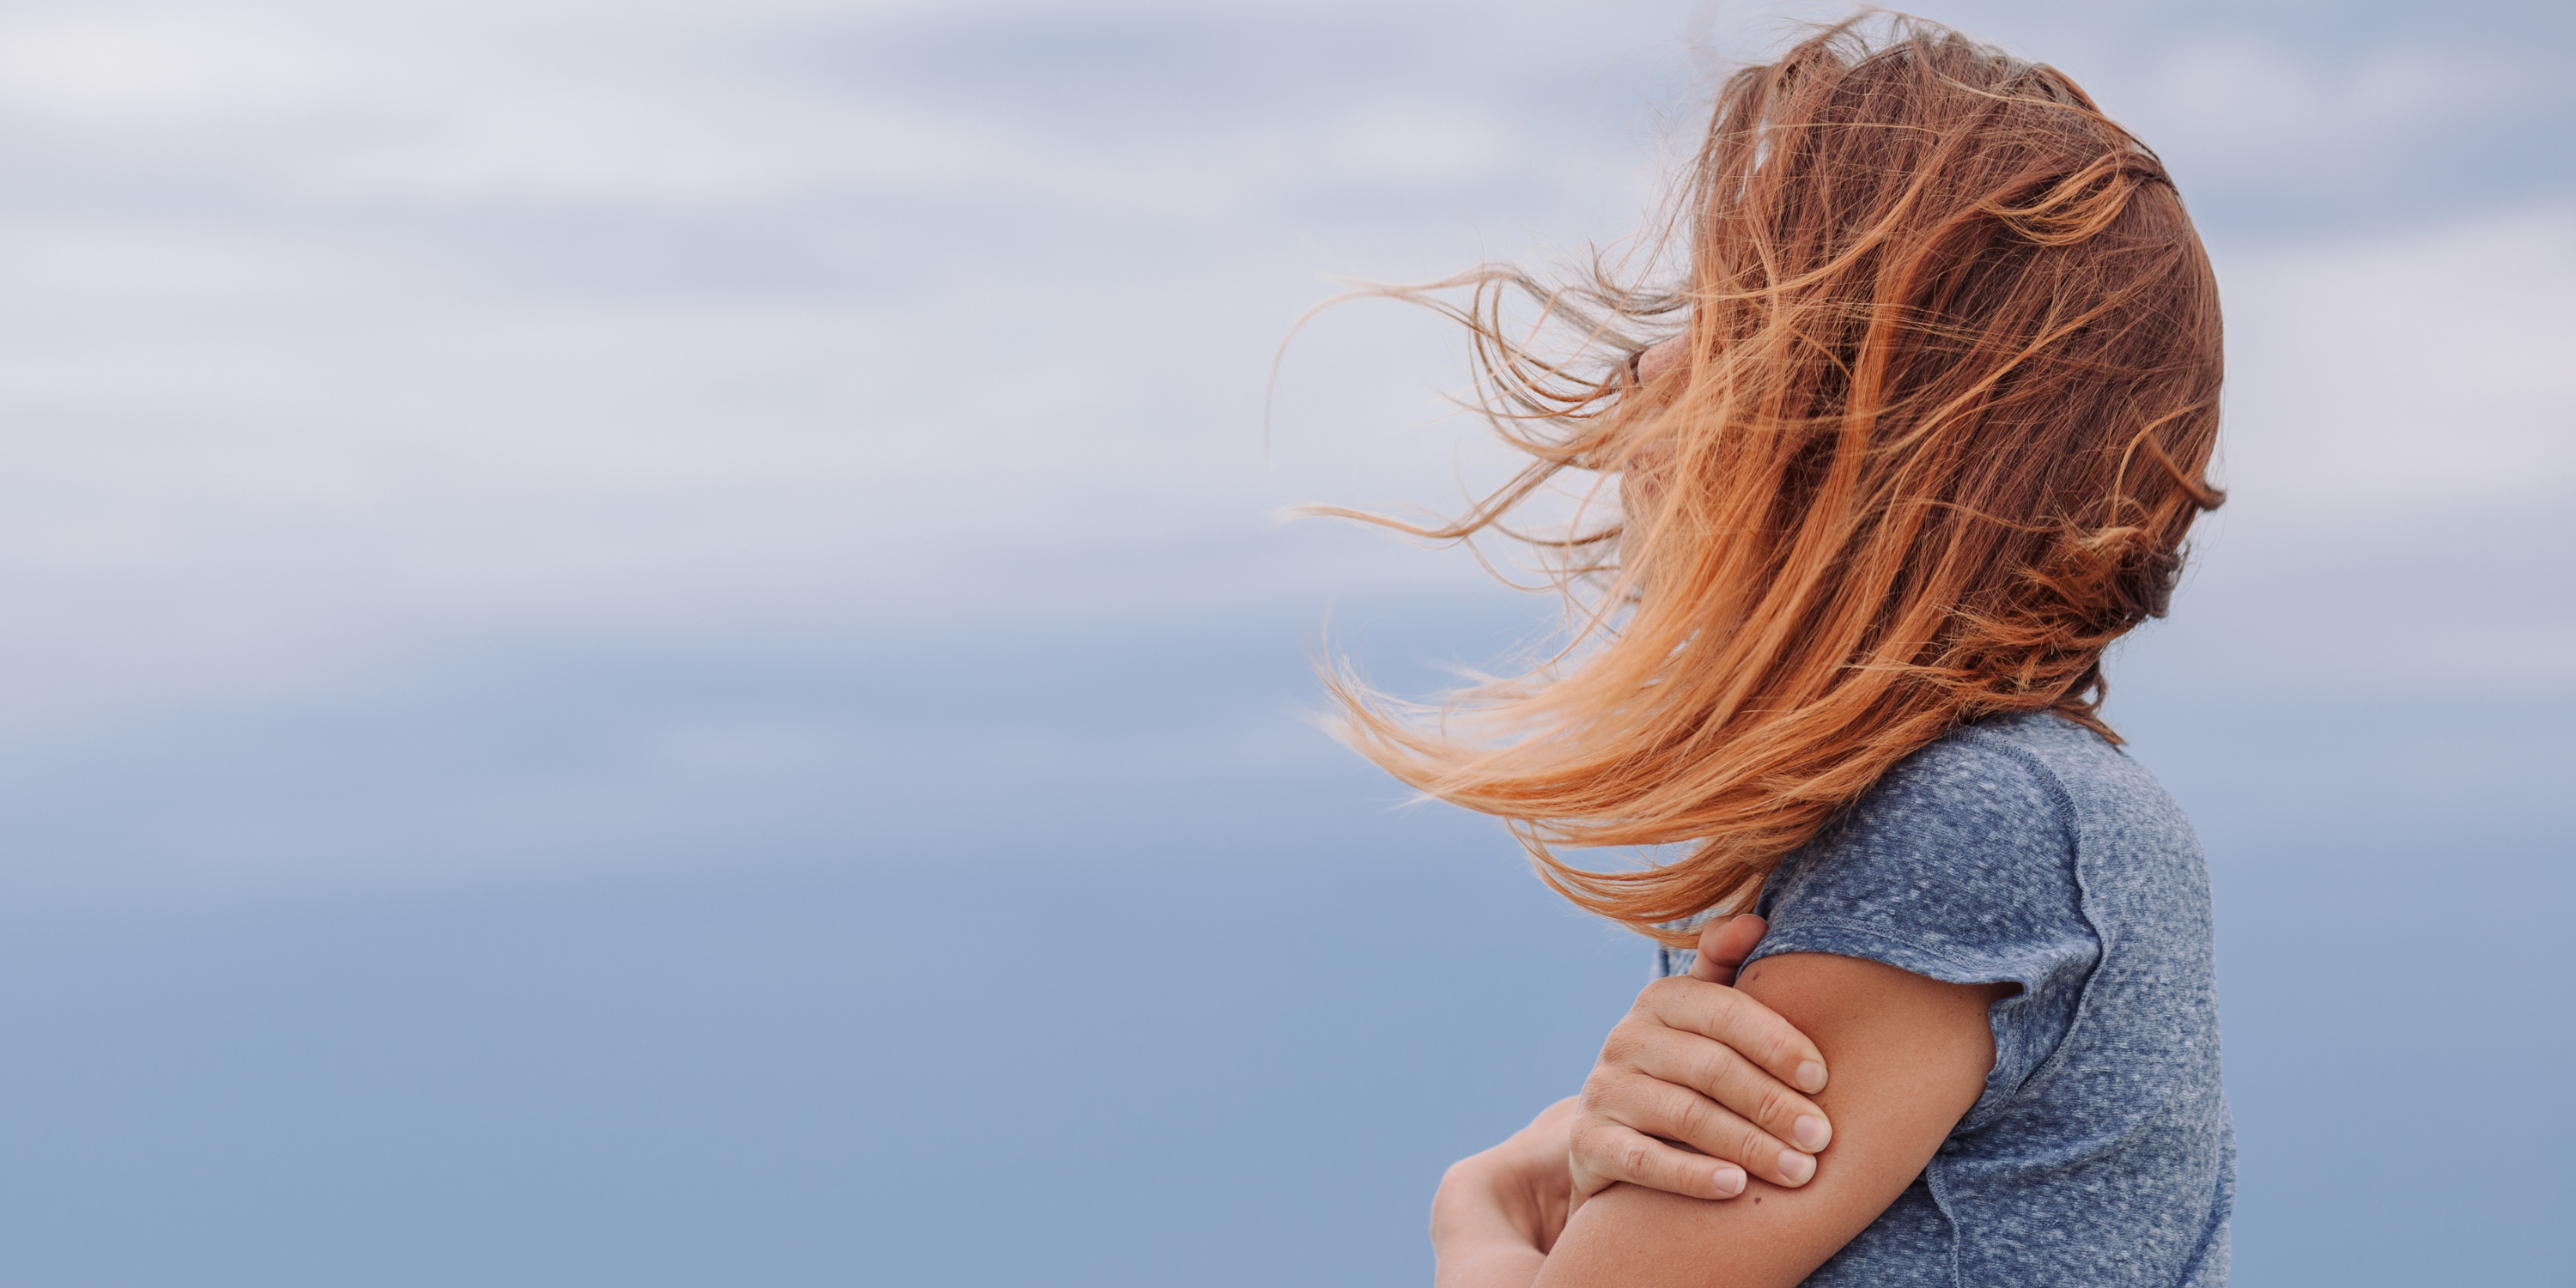 Woman looking out at the sea, wind blowing her hair